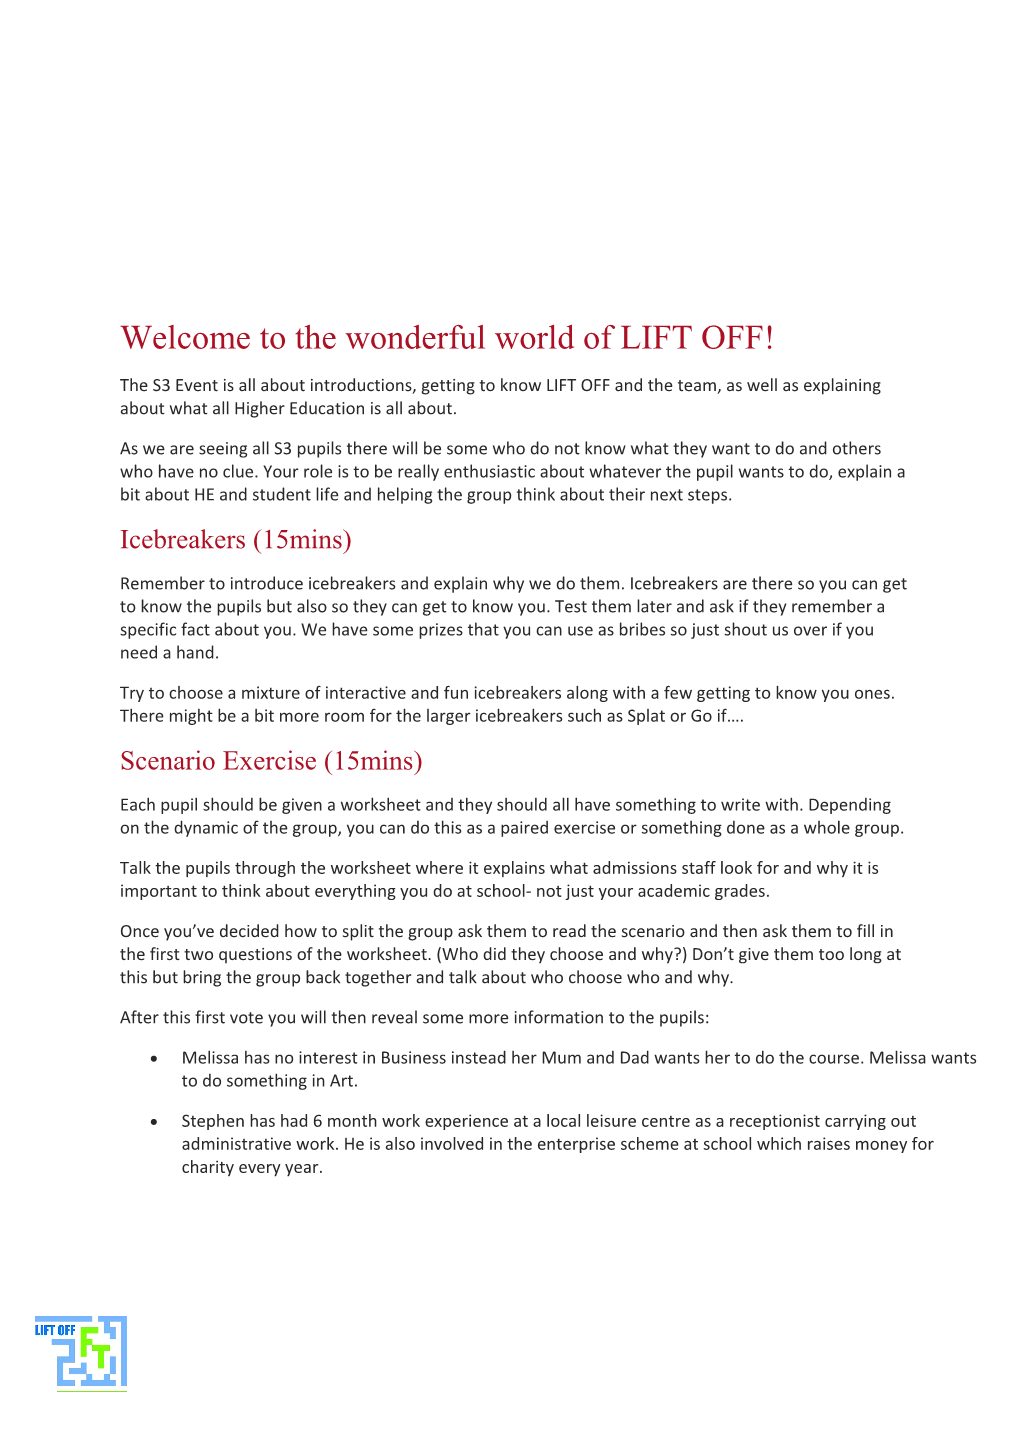 Welcome to the Wonderful World of LIFT OFF!